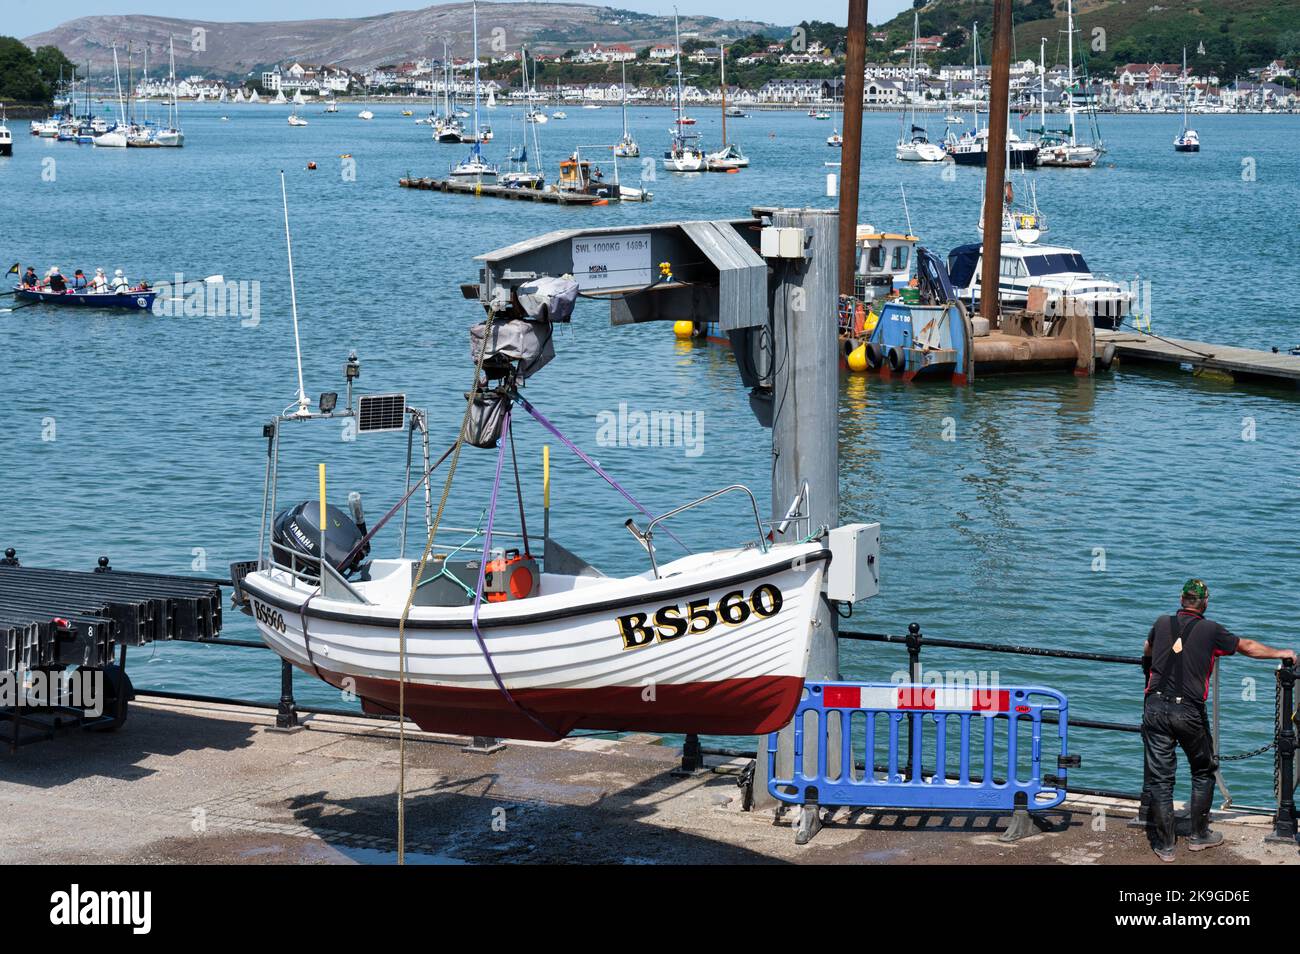 Conwy, UK- July 16, 2022: A small fishing boat getting lifted out of the water at Conwy harbor in the village of Conwy, Northern Wales. Stock Photo